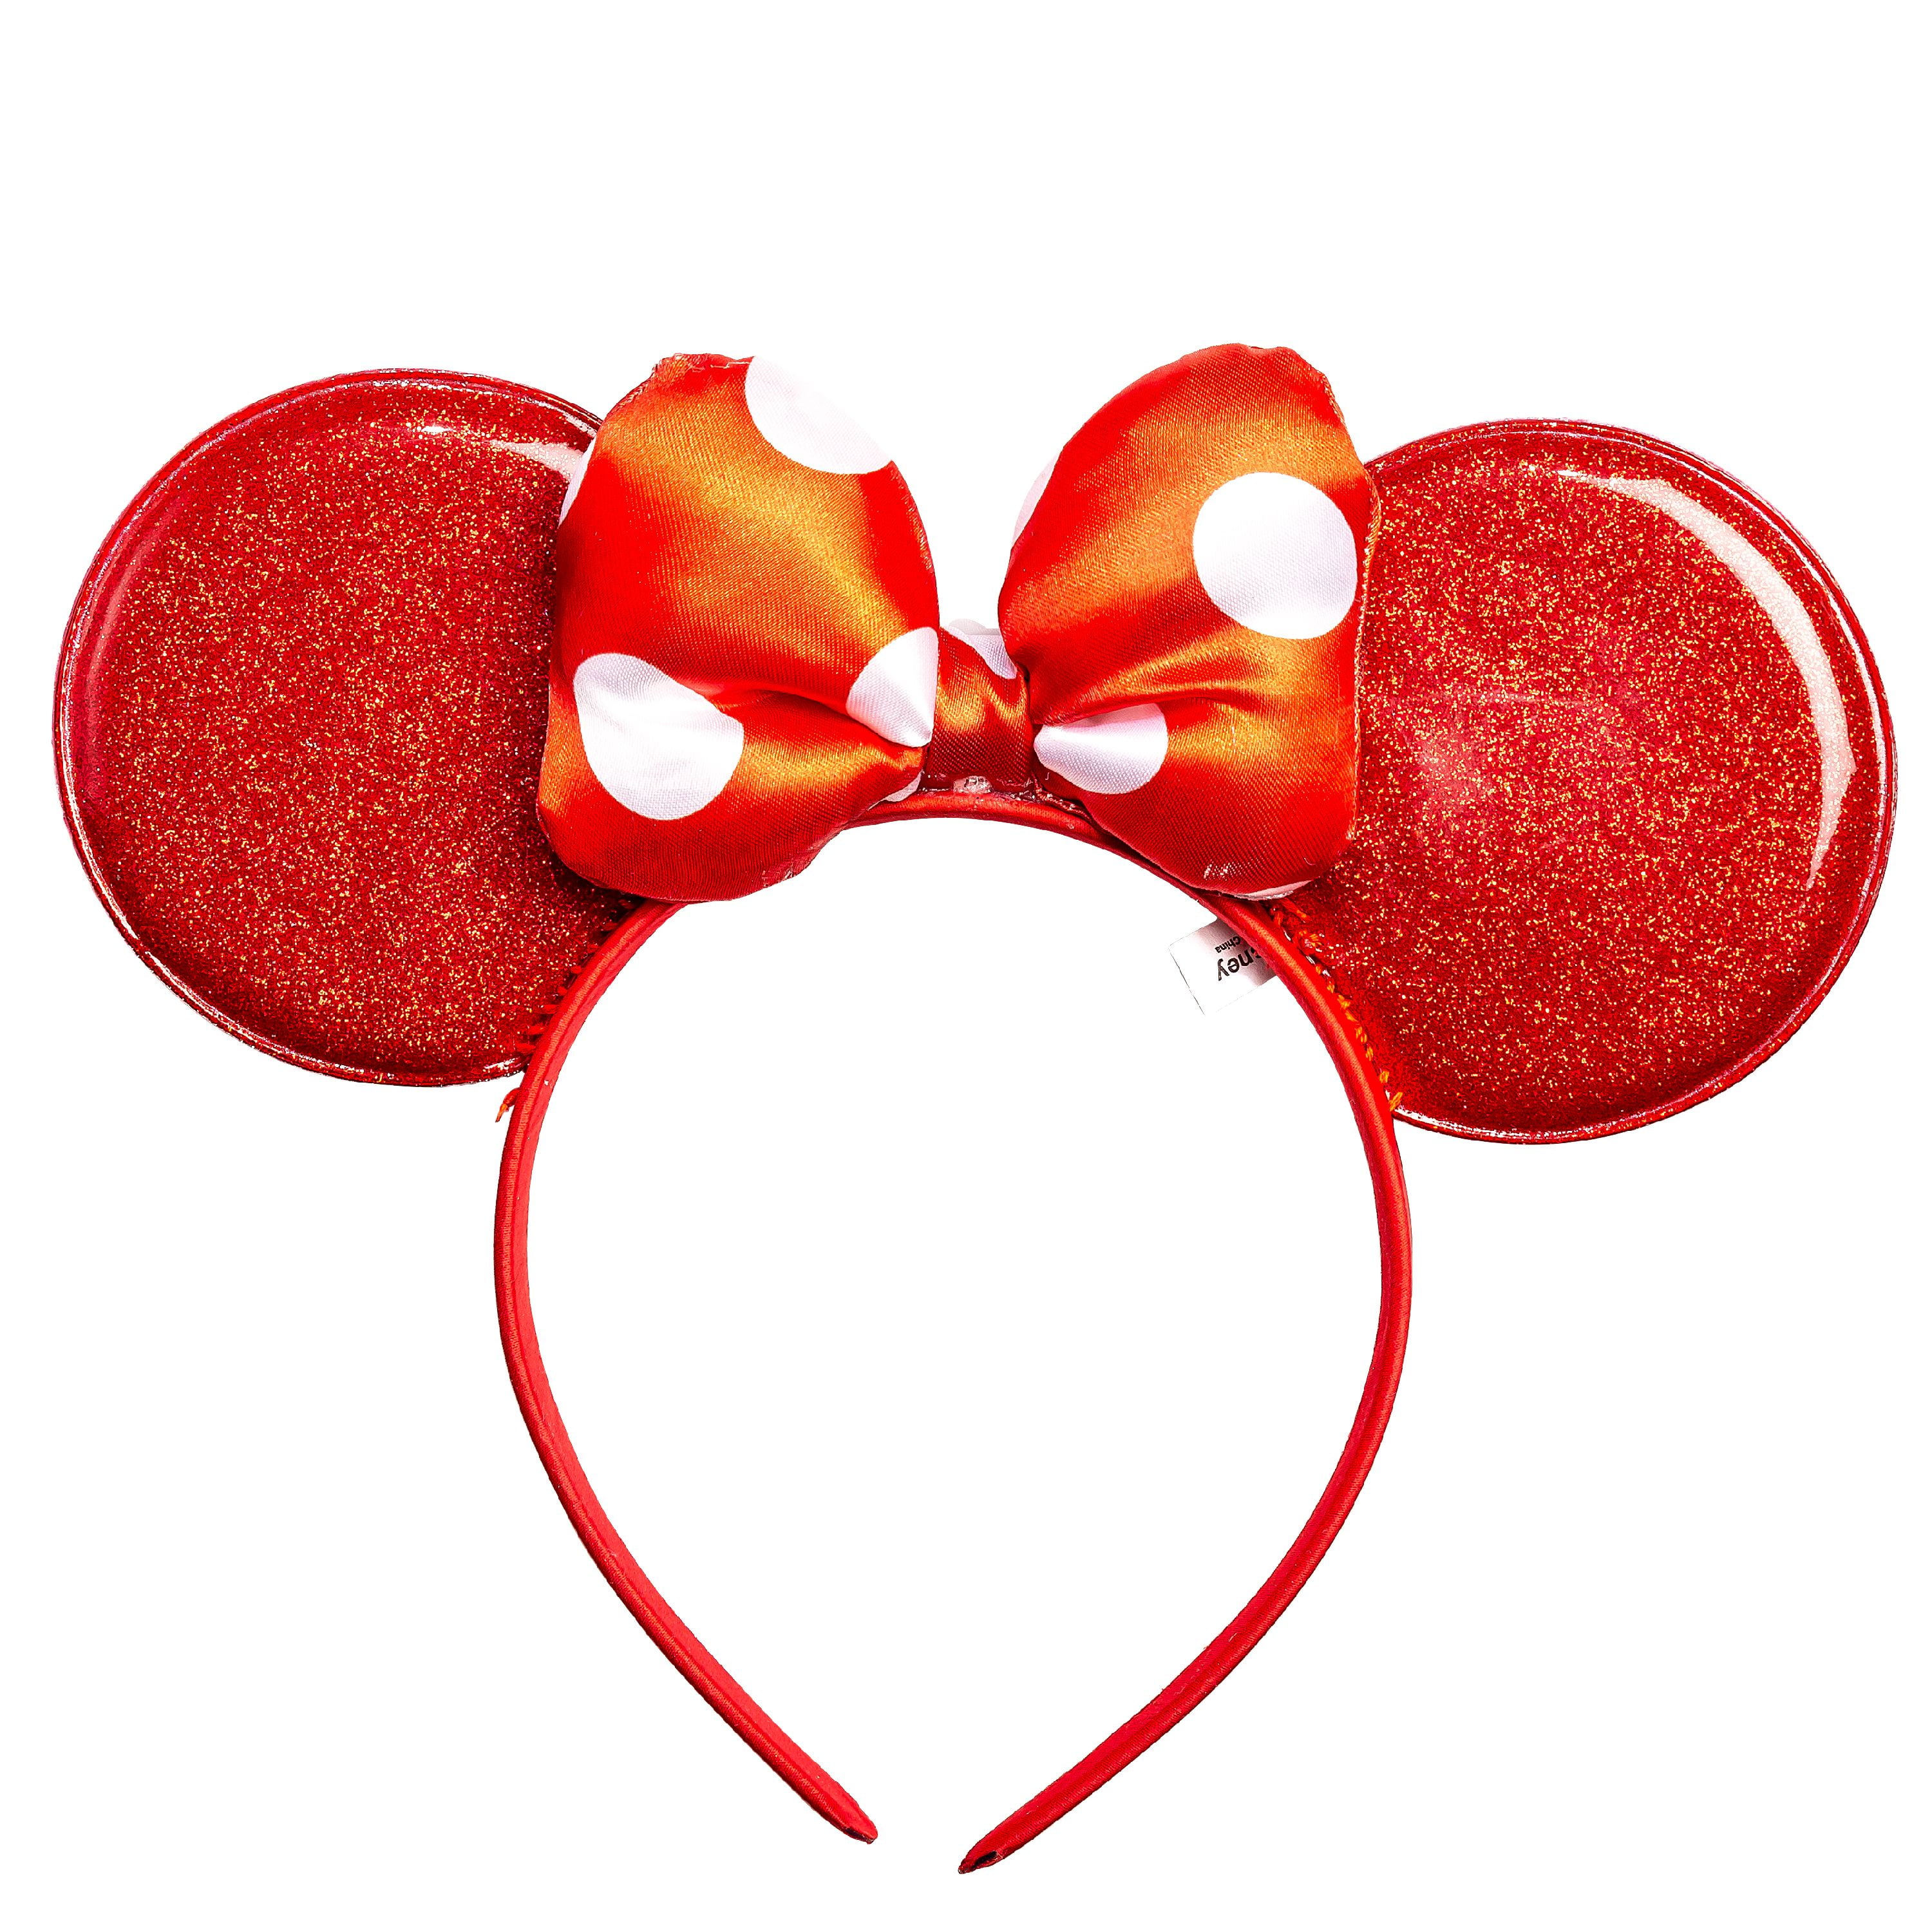 Mouse Ears & Red Bow Headband Fancy Dress Costume Mickey Minnie Outfit 